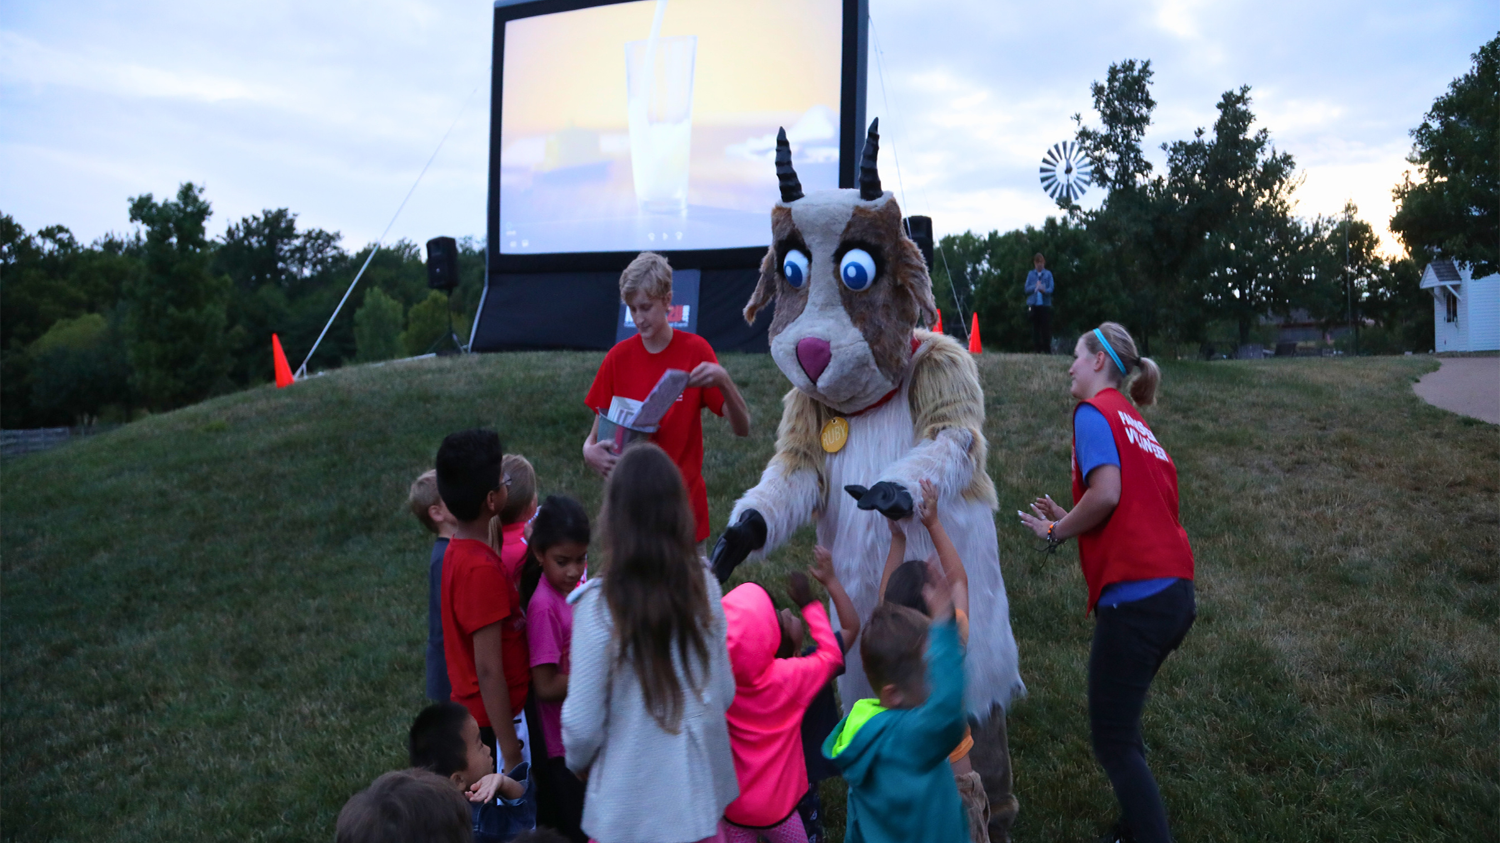 Farmstead Mascot Ruby the Goat greets children at the Farmstead's Movie Night.